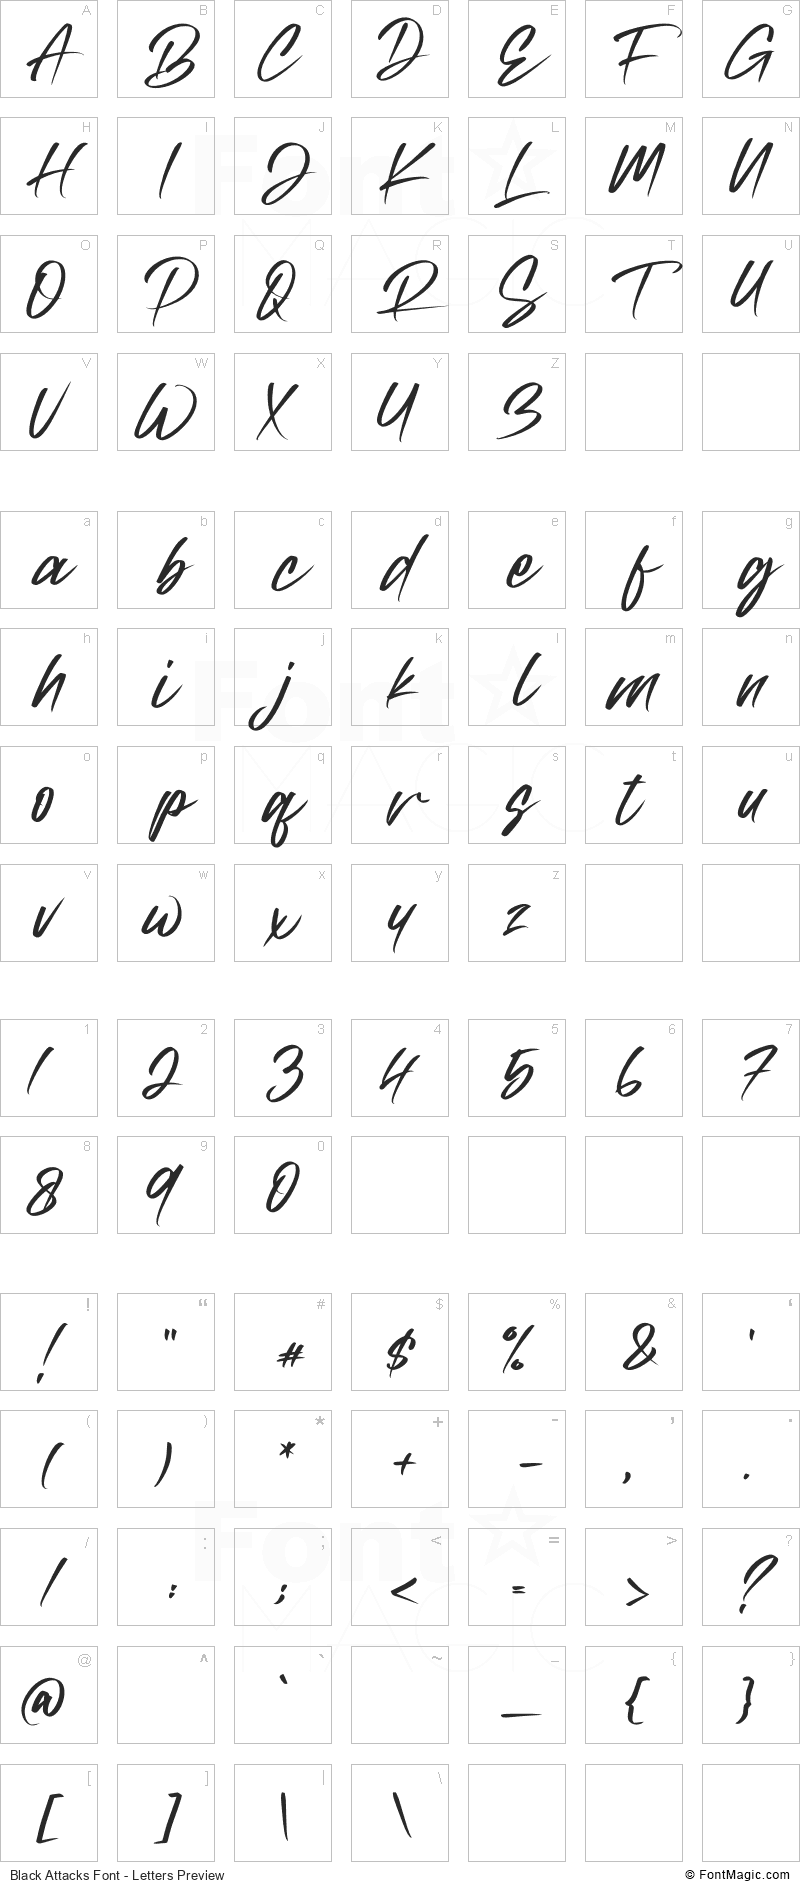 Black Attacks Font - All Latters Preview Chart